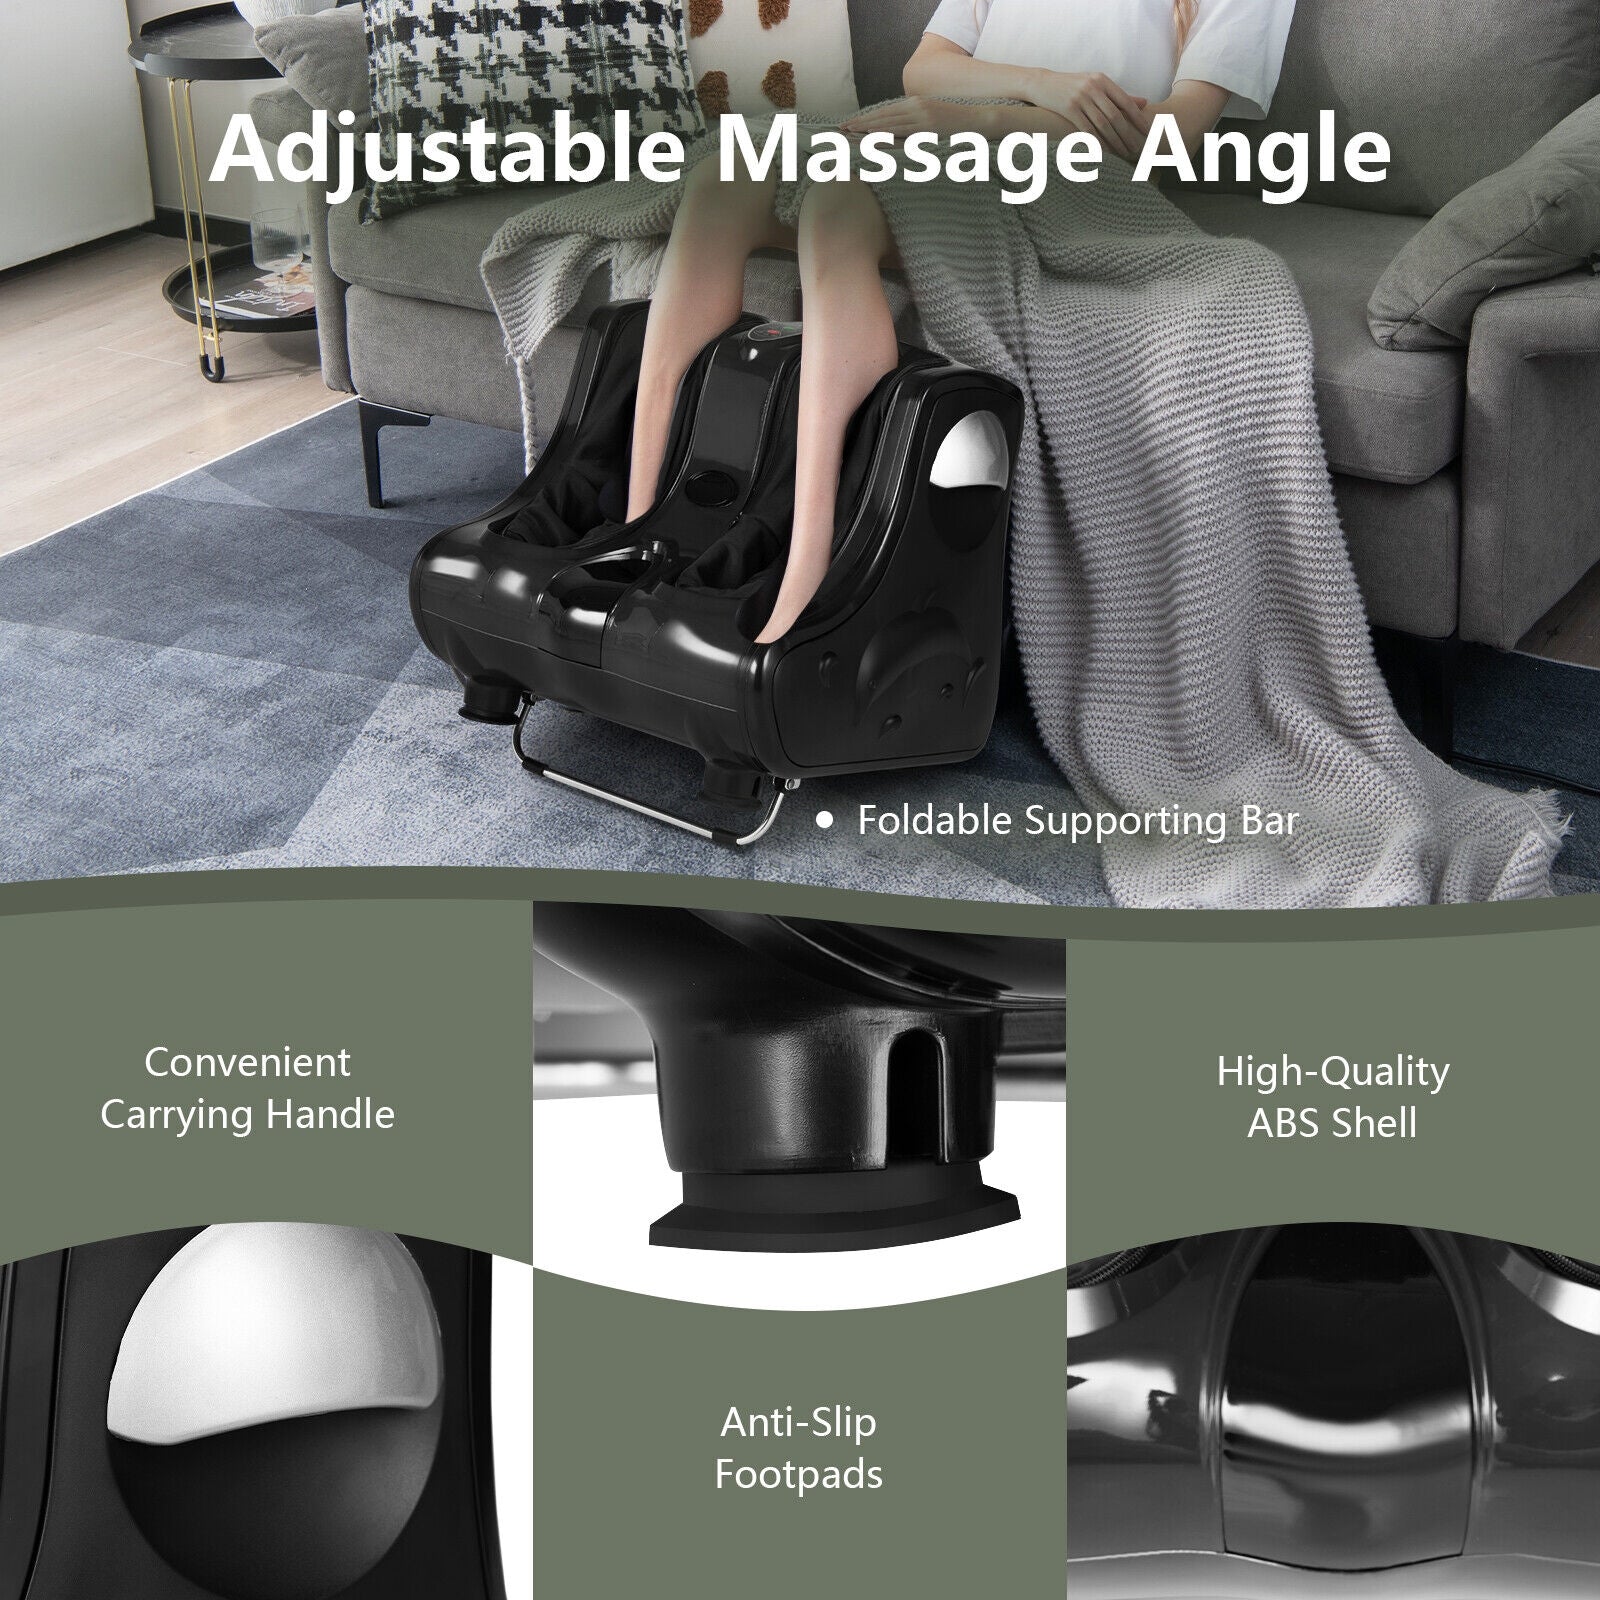 Foot and Calf Massager with Heat Vibration Deep Kneading and Shiatsu at Gallery Canada